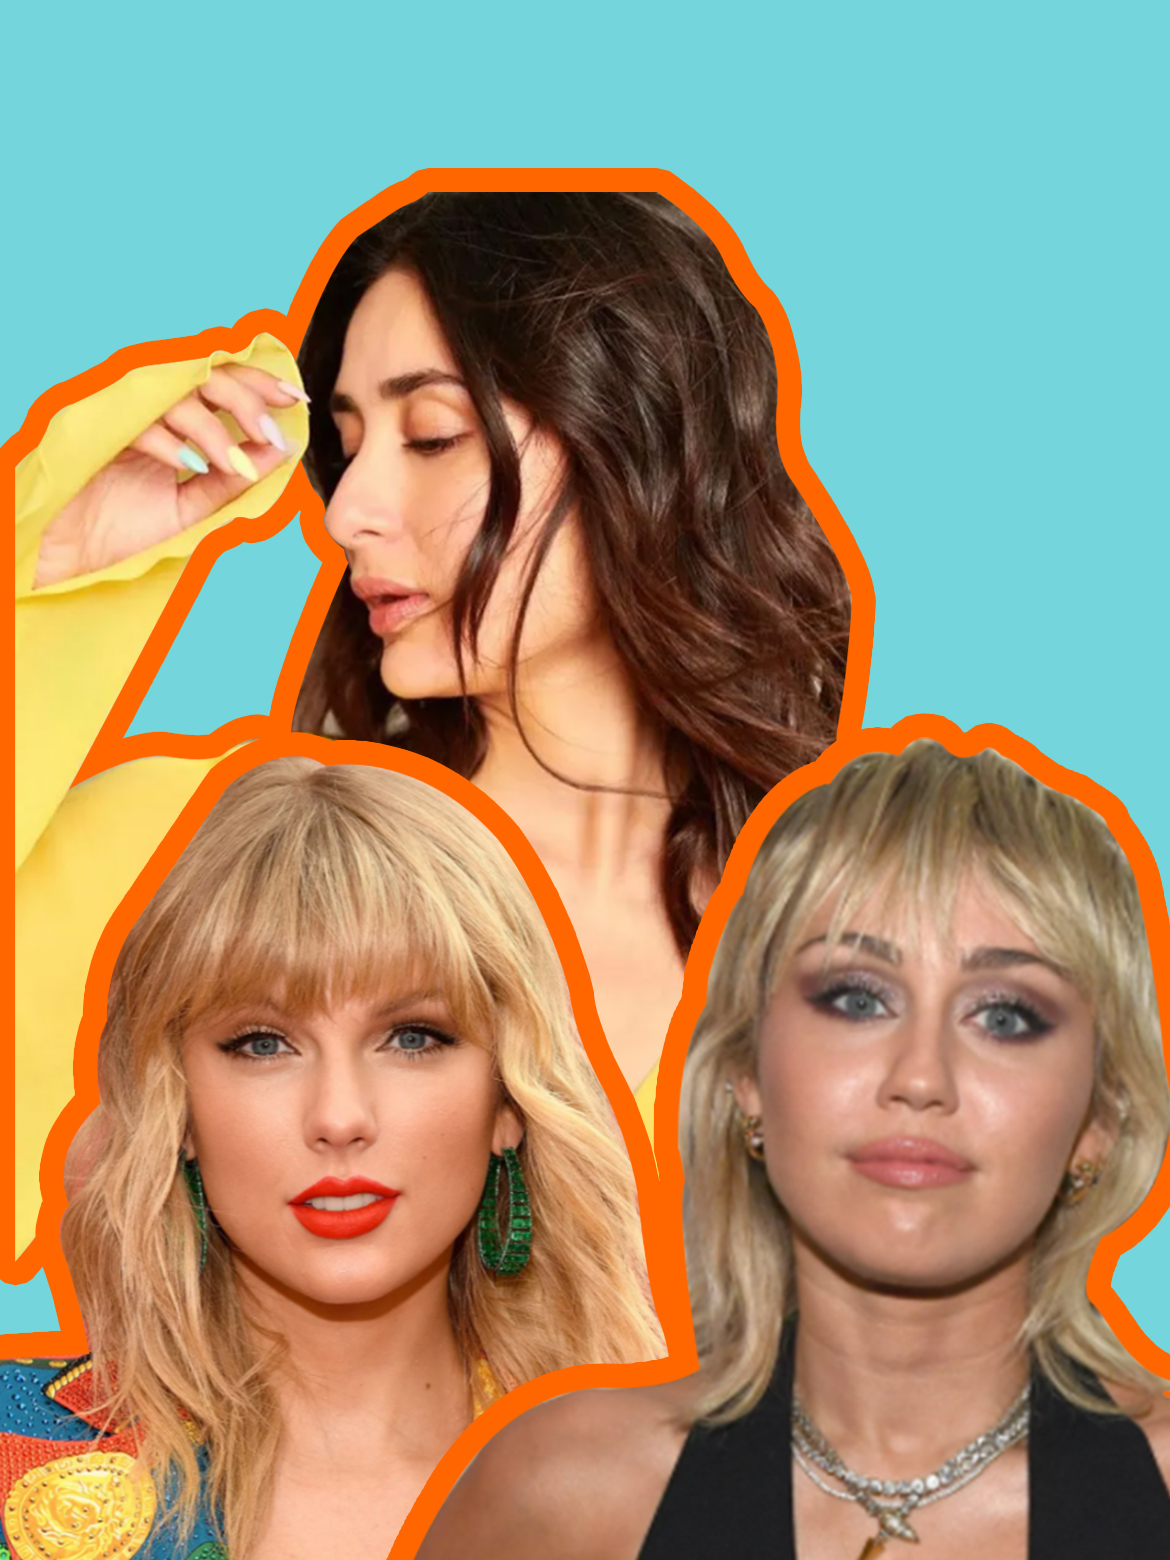 Celebrity hairstyles: How to choose the right bangs for your face shape